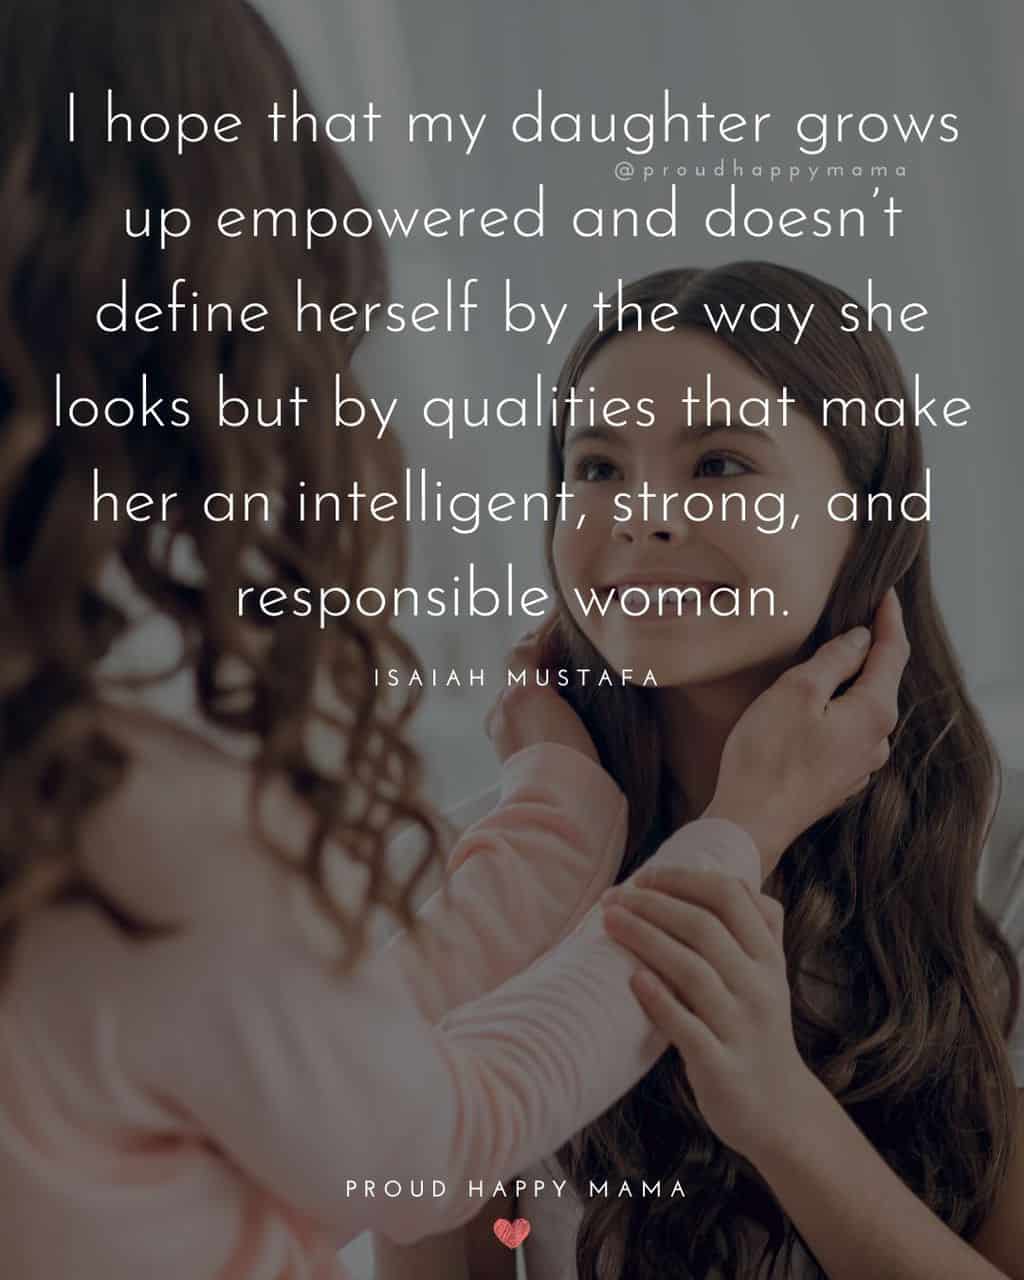 quotes for daughter - ‘I hope that my daughter grows up empowered and doesn’t define herself by the way she looks but by qualities that